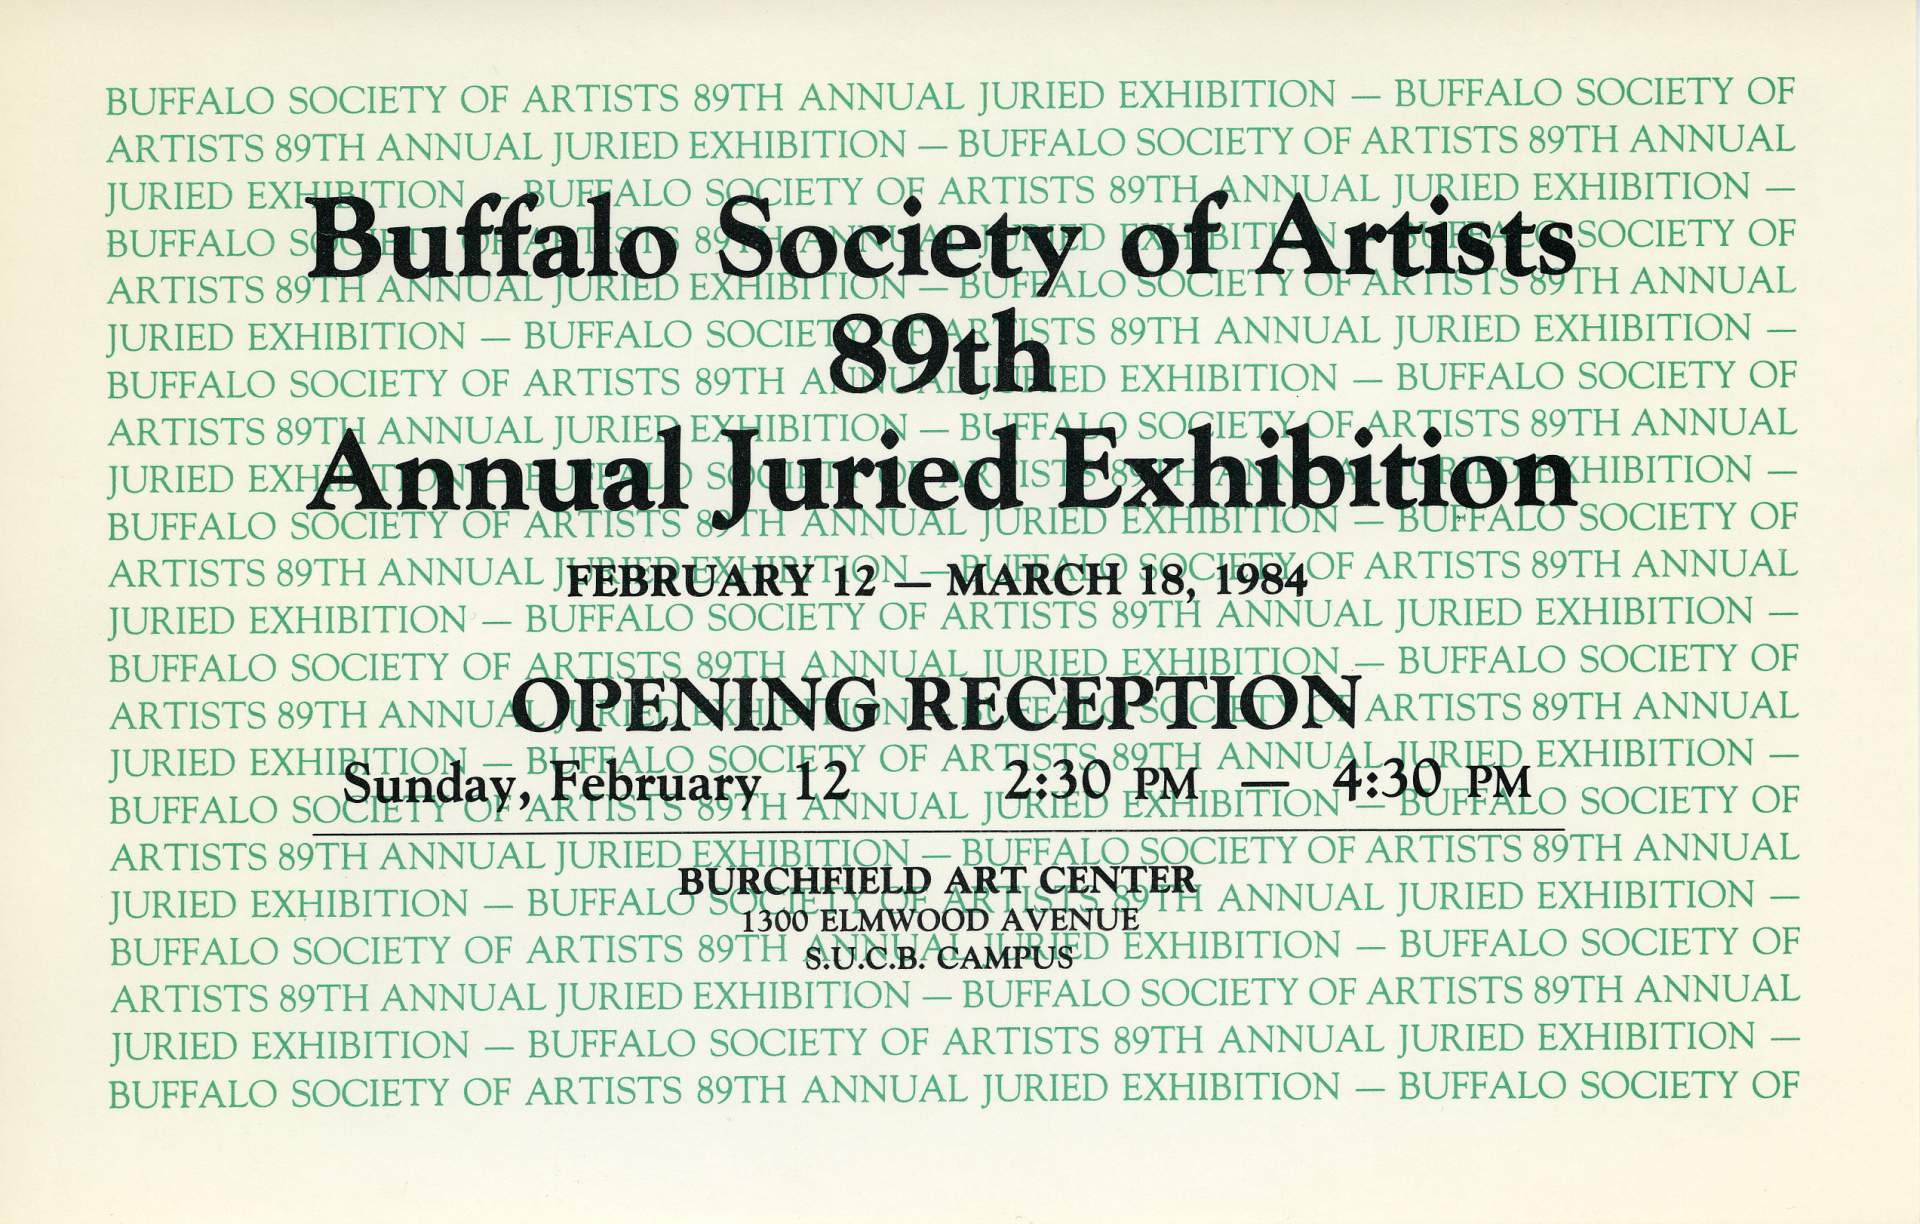 Buffalo Society of Artists 89th Annual Juried Exhibition postcard